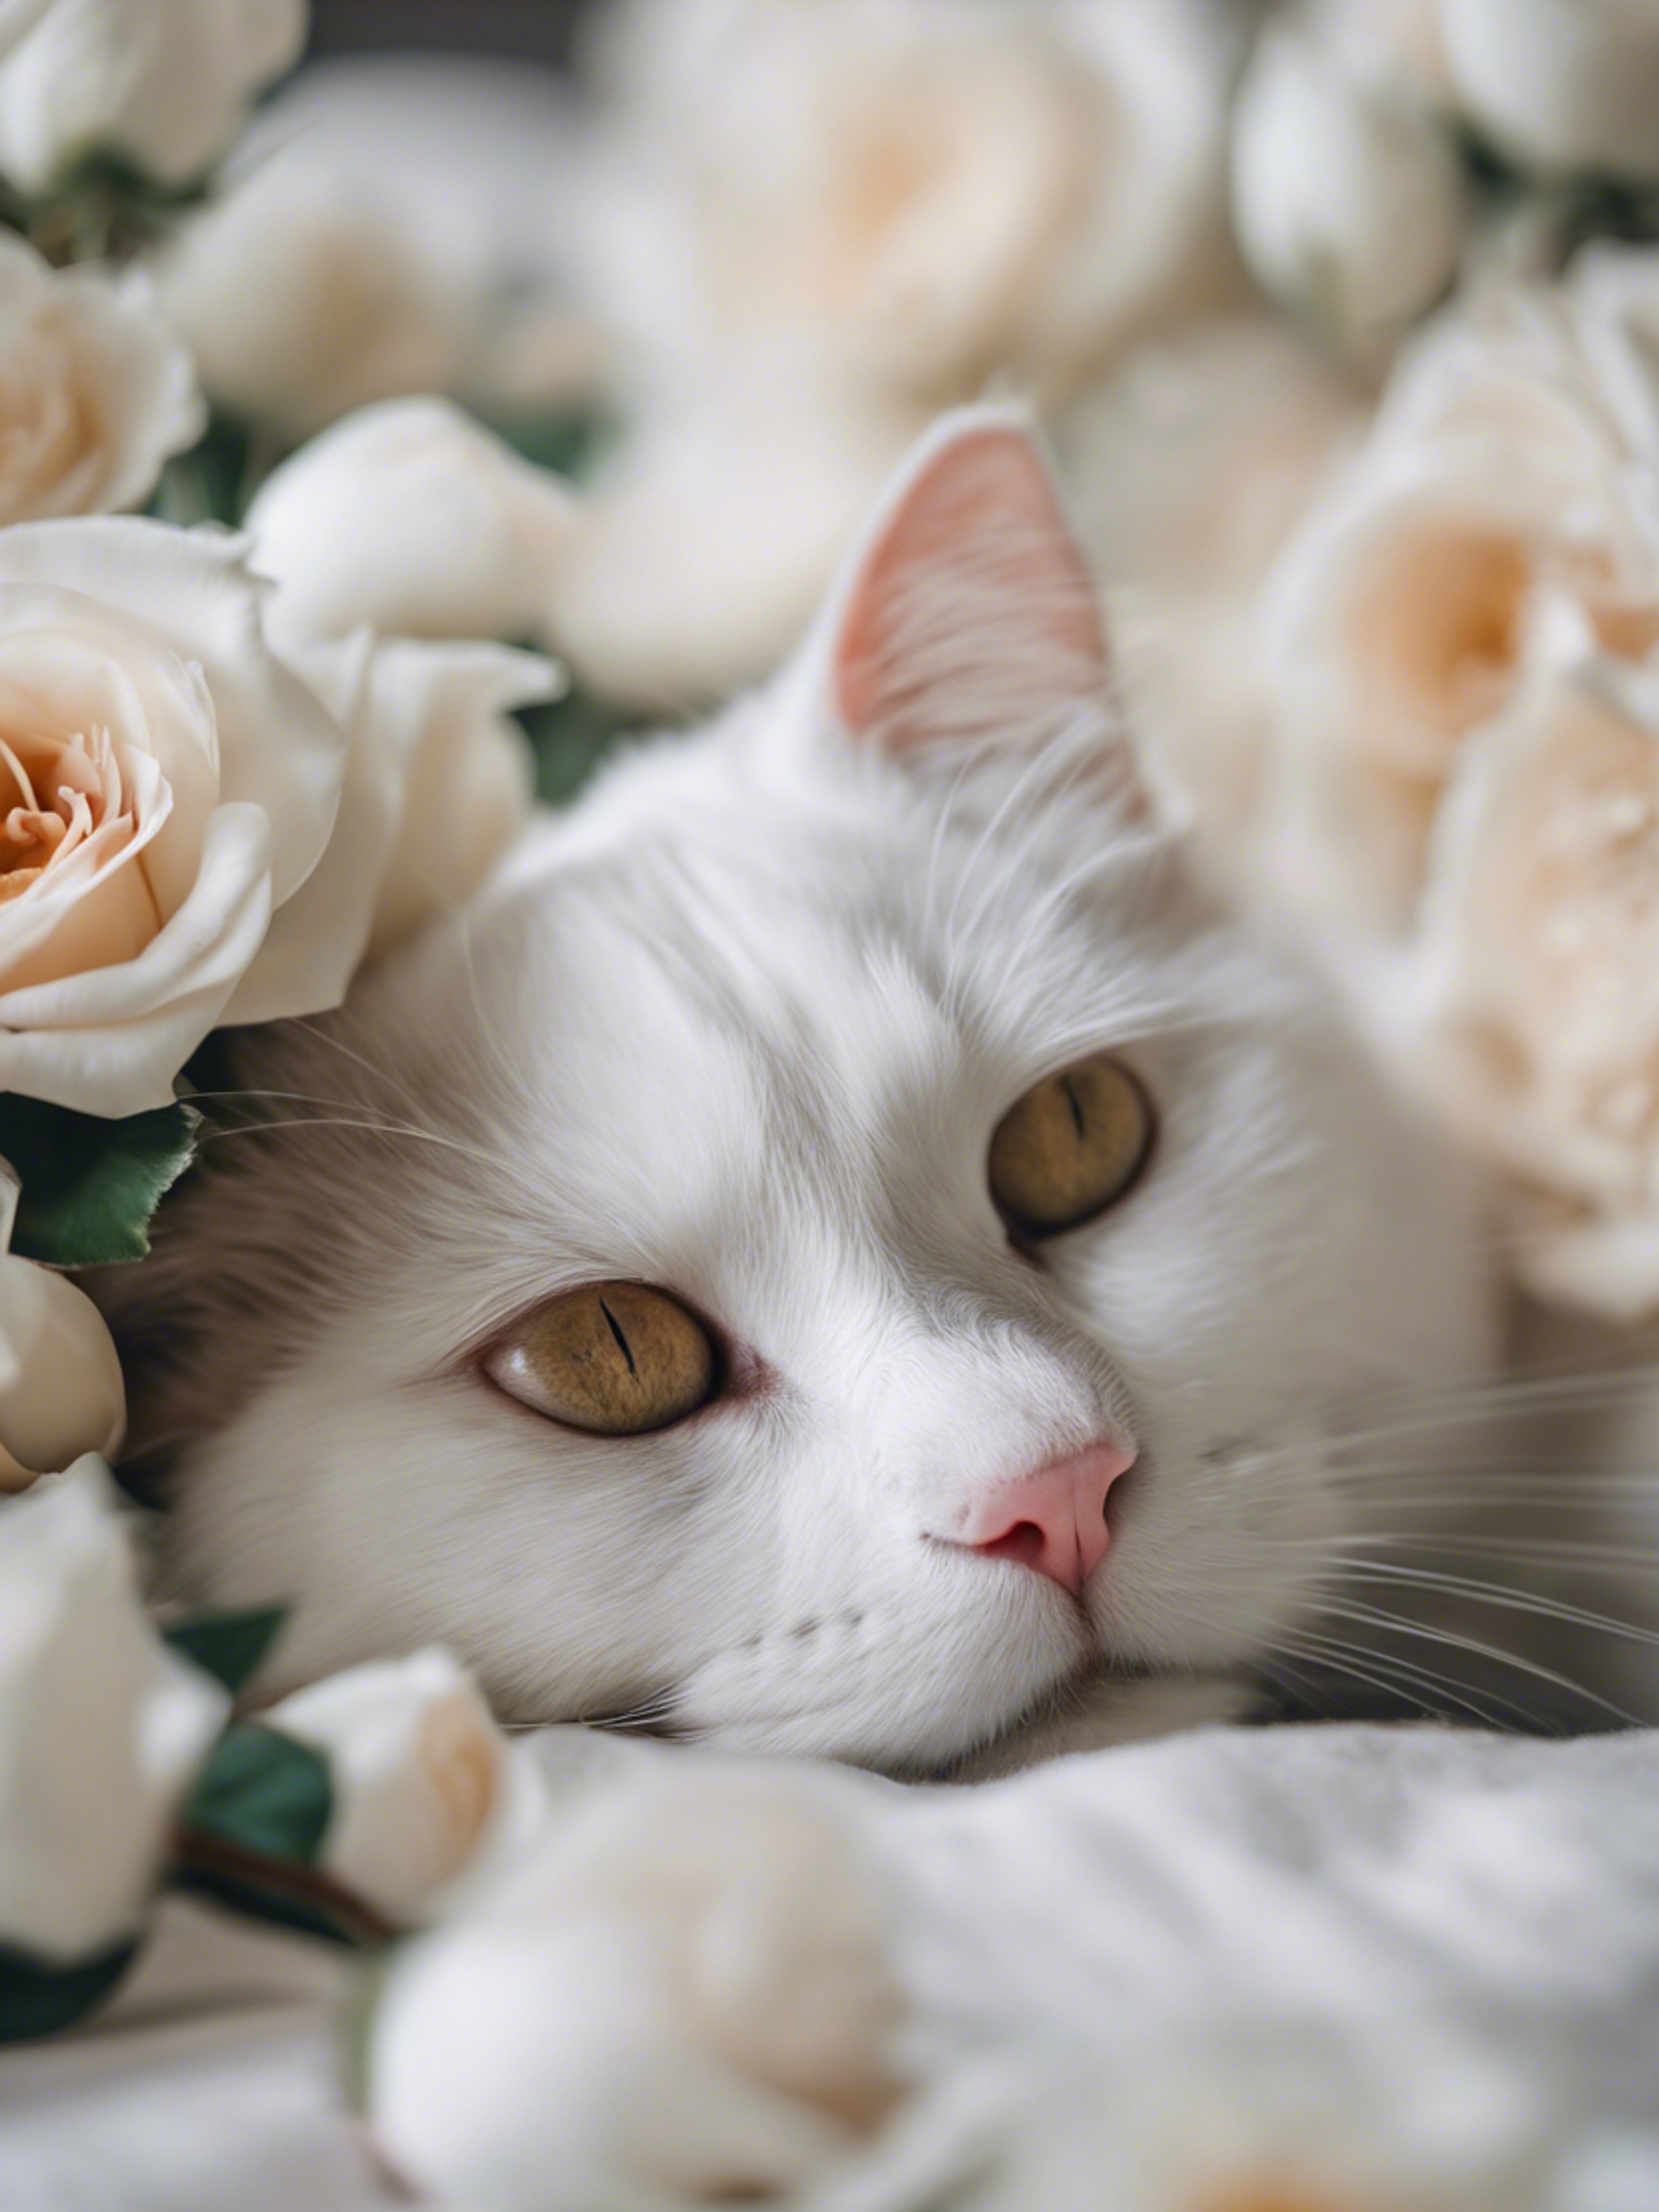 A picturesque content white cat sleeping amidst a bed of white roses. Wallpaper[21bd514b84c74c92a754]